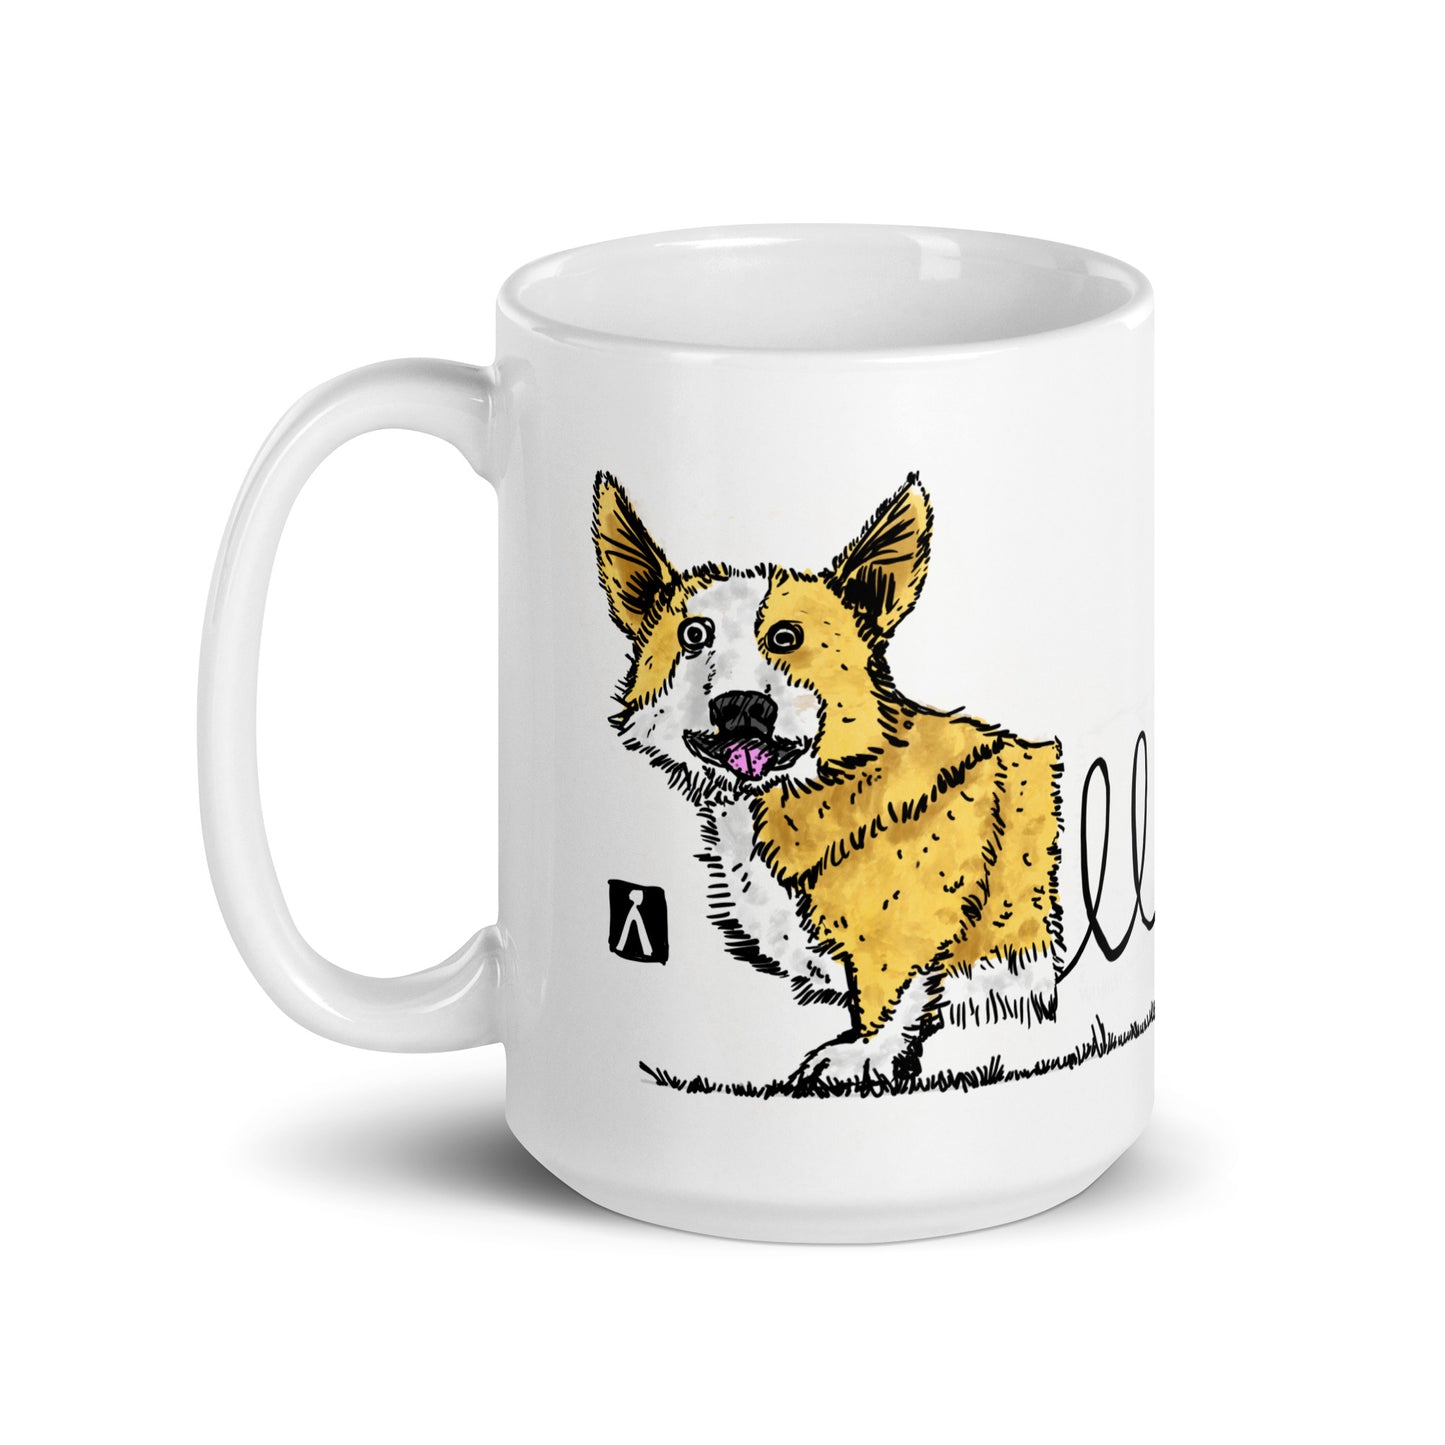 BellavanceInk: Coffee Mug With A Corgi Attached Together By A Coil